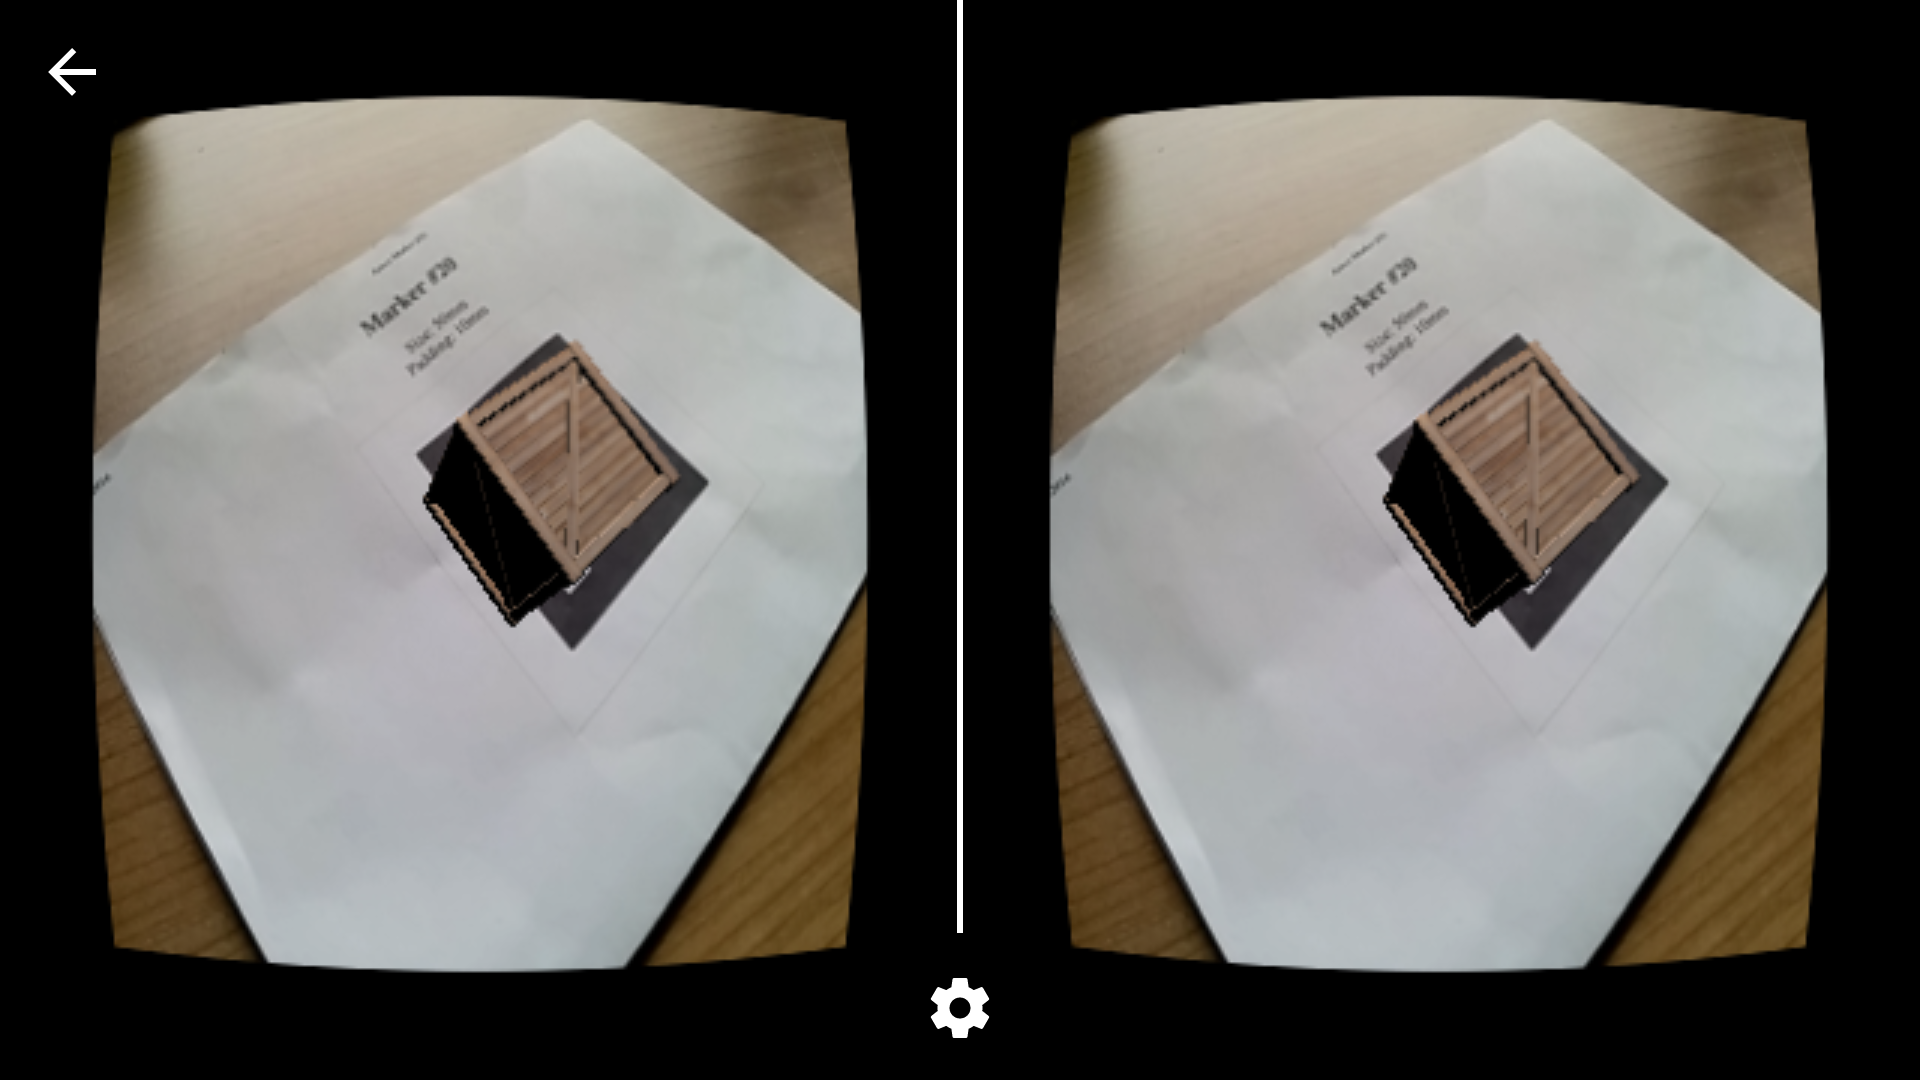 WebAR: Combining Cardboard Style VR and the Phone’s Camera